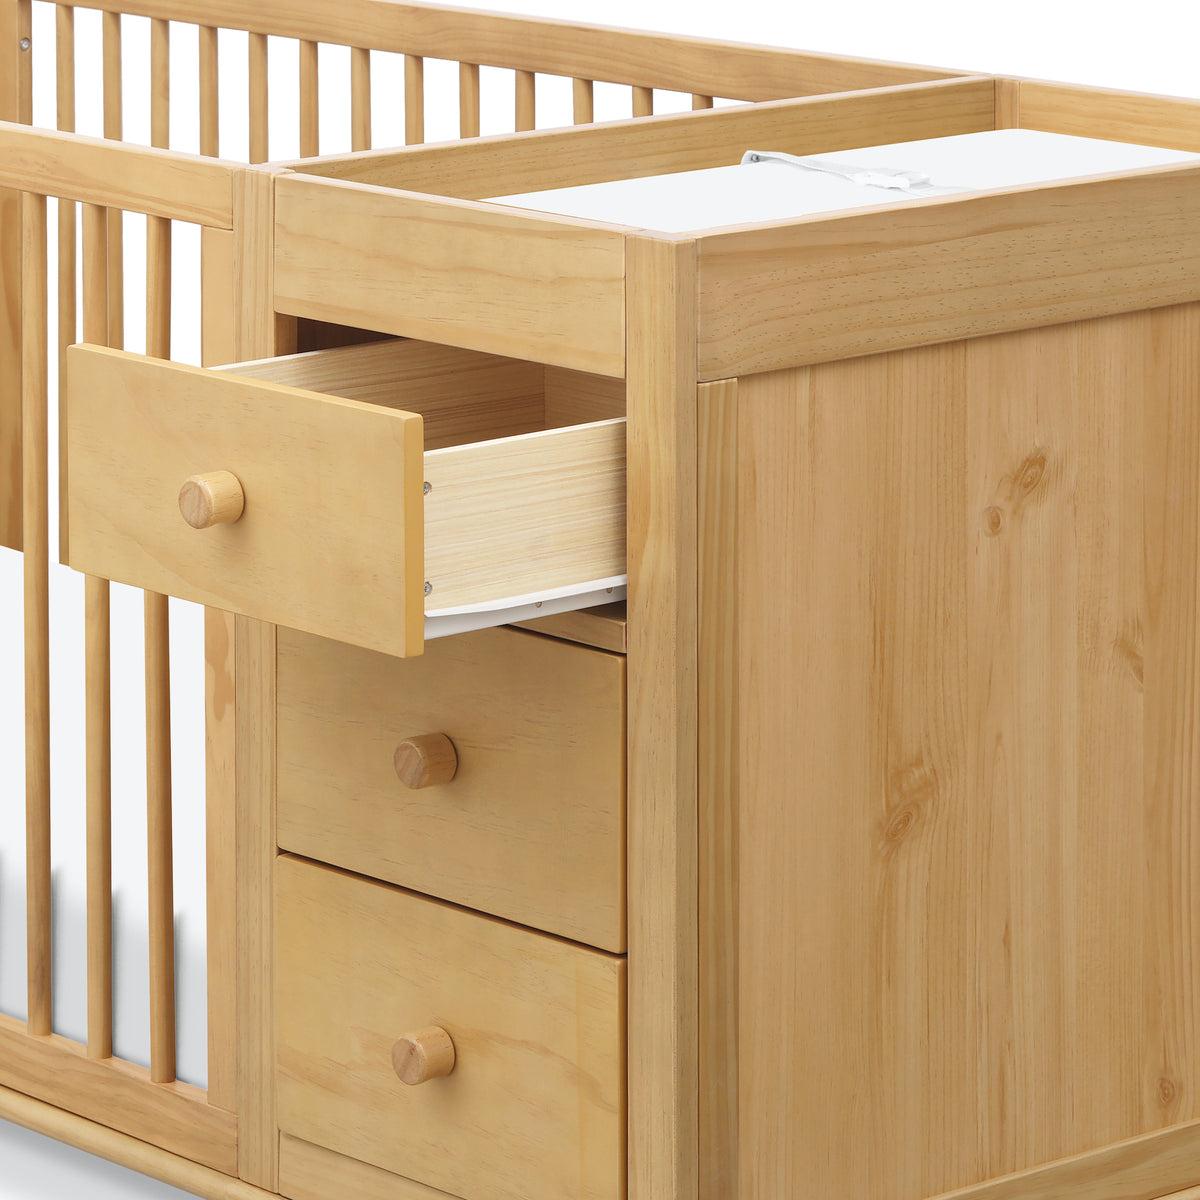 Marley 3-in-1 Crib and Changer Combo